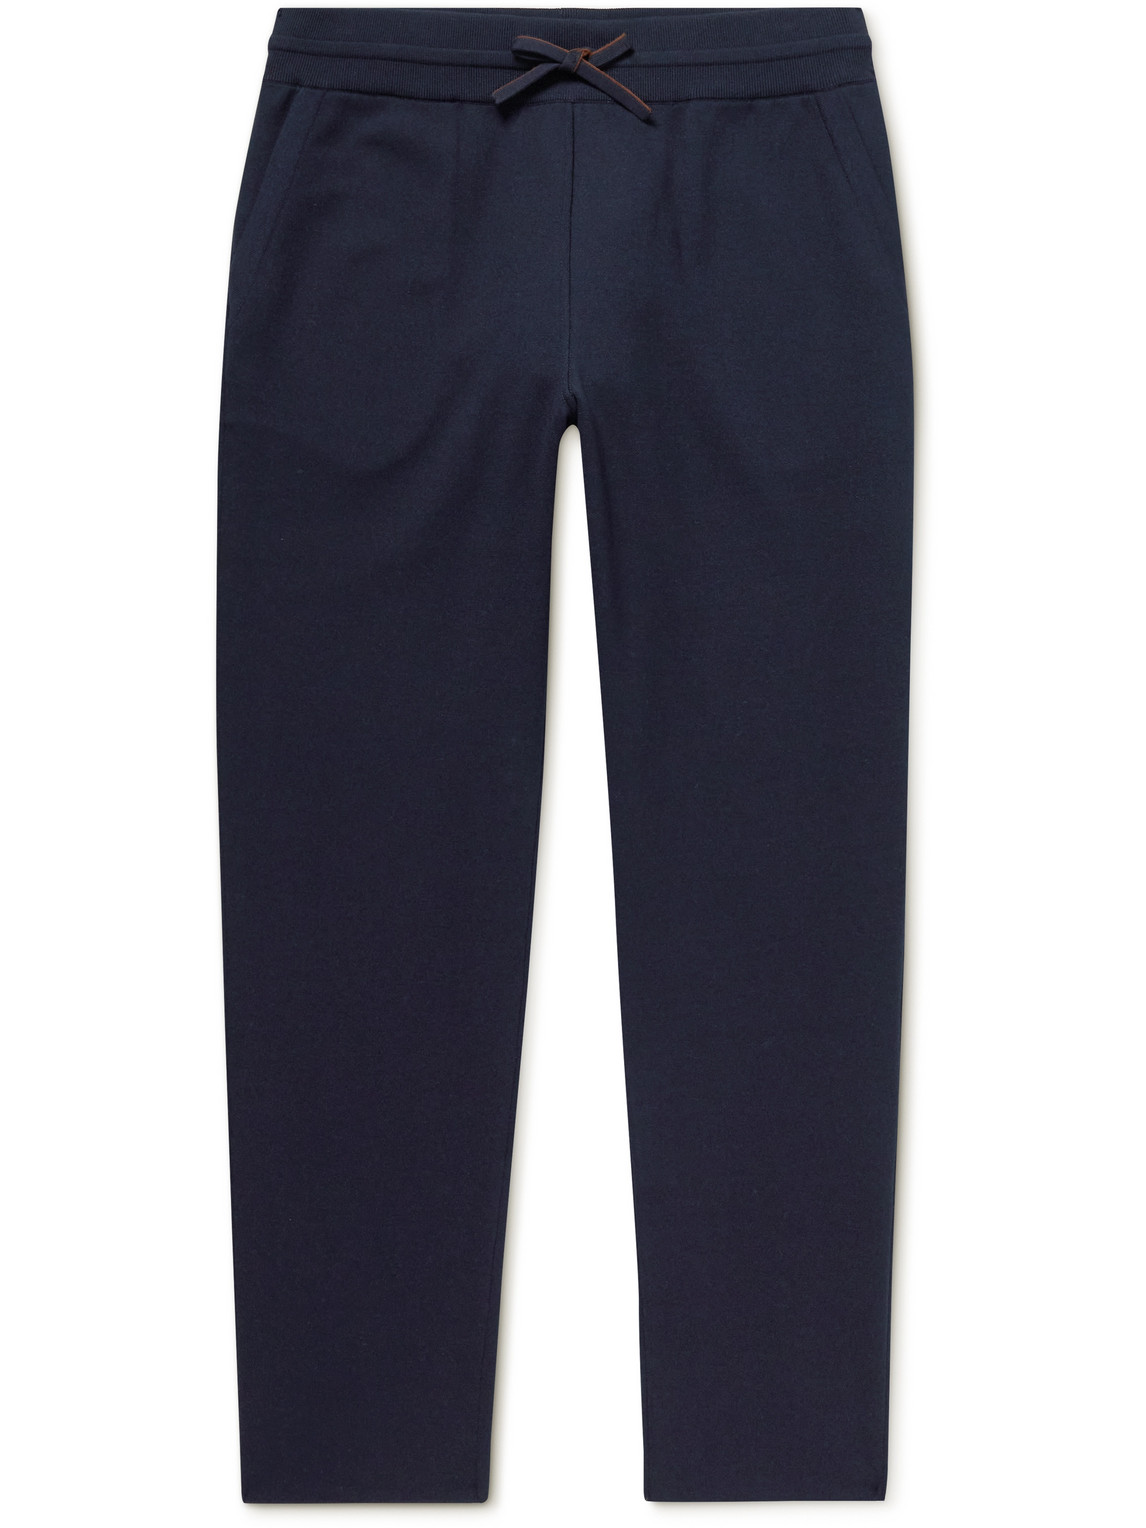 Tapered Cashmere and Silk-Blend Sweatpants